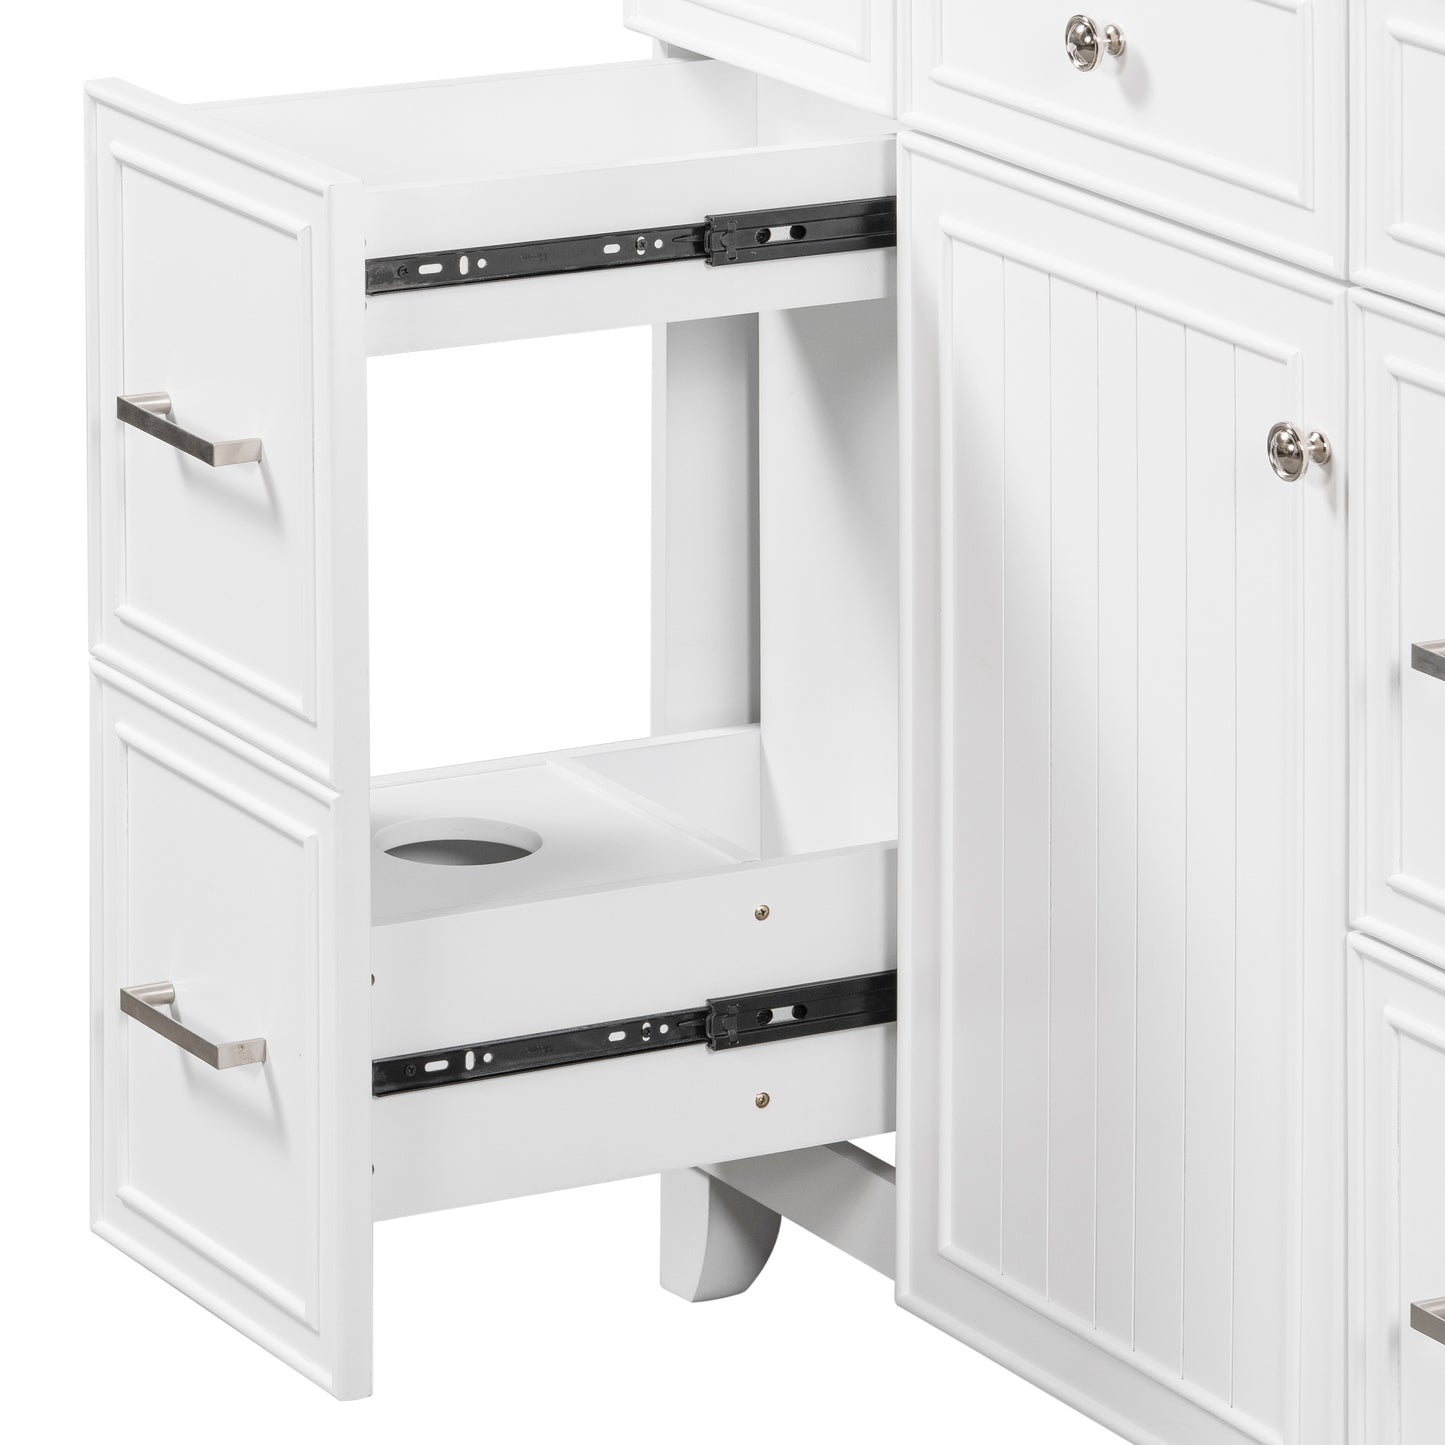 36" Bathroom Vanity Cabinet with Sink Top Combo Set,White,Single Sink,Shaker Cabinet with Soft Closing Door and Drawer